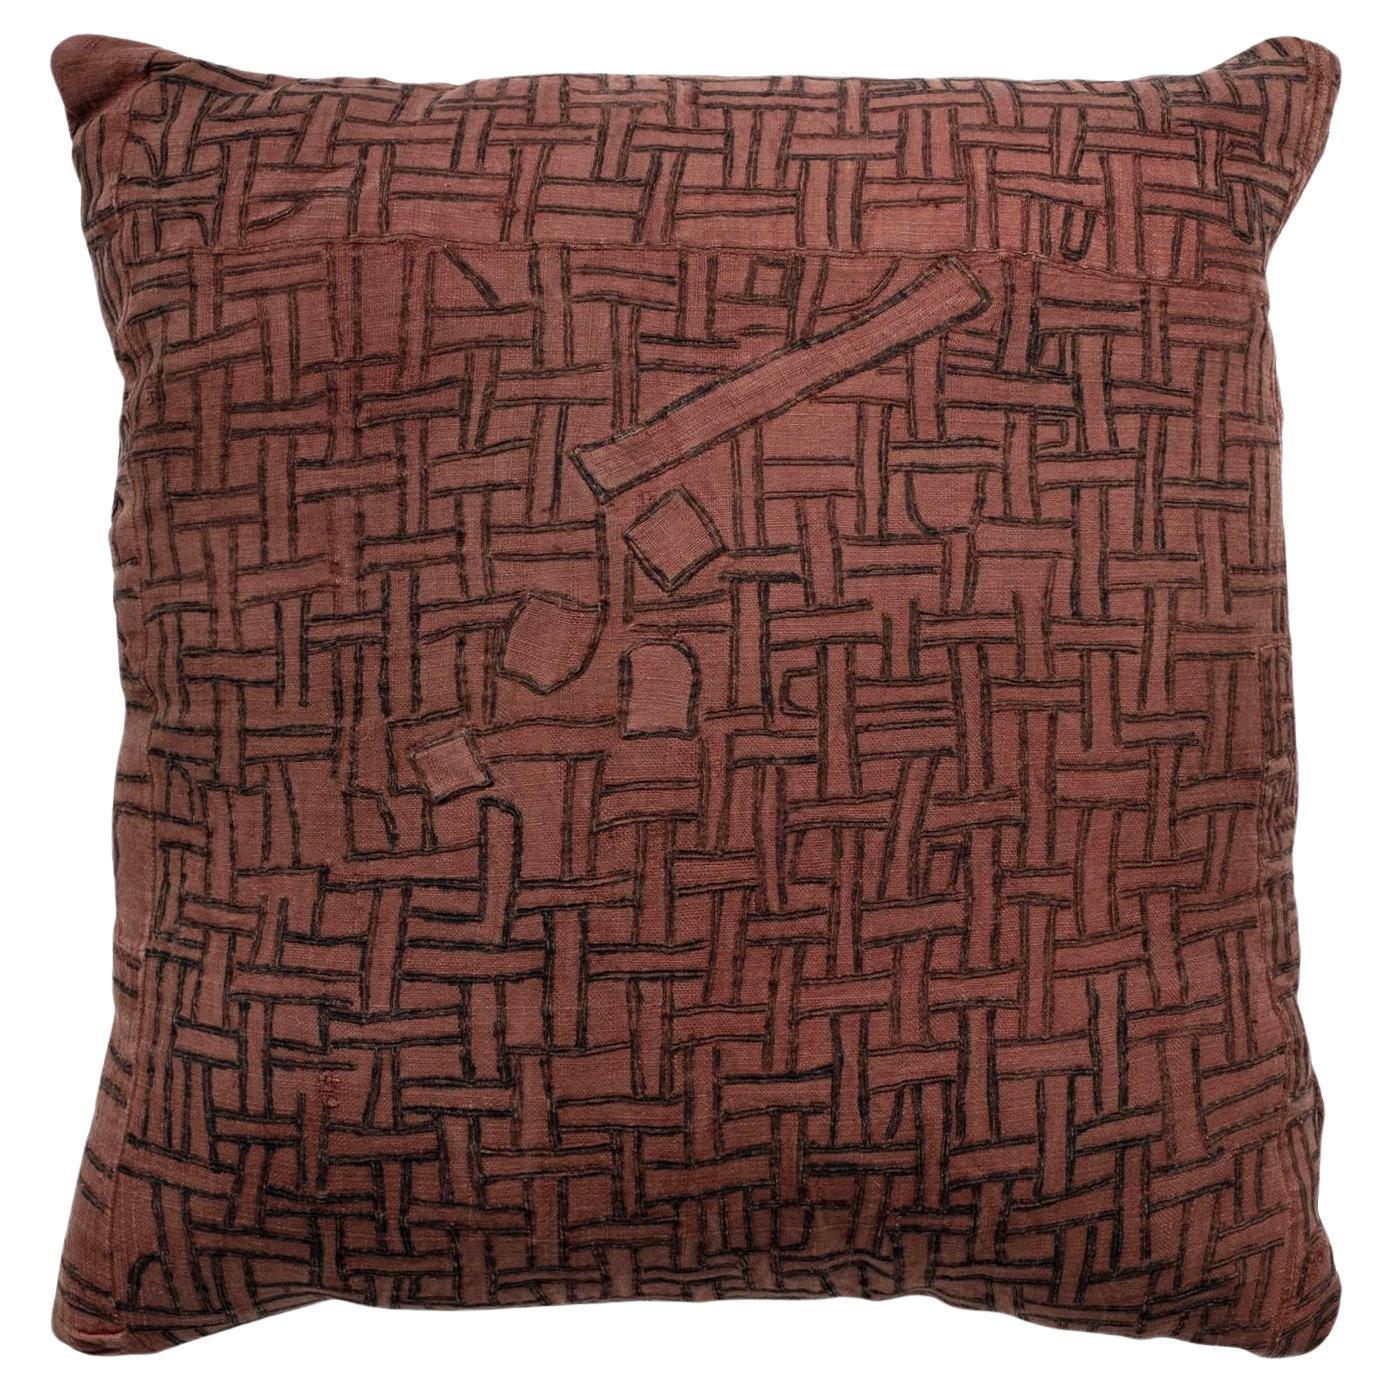 Wonderful Large Faded Plum-Color Embroidered Cushion For Sale